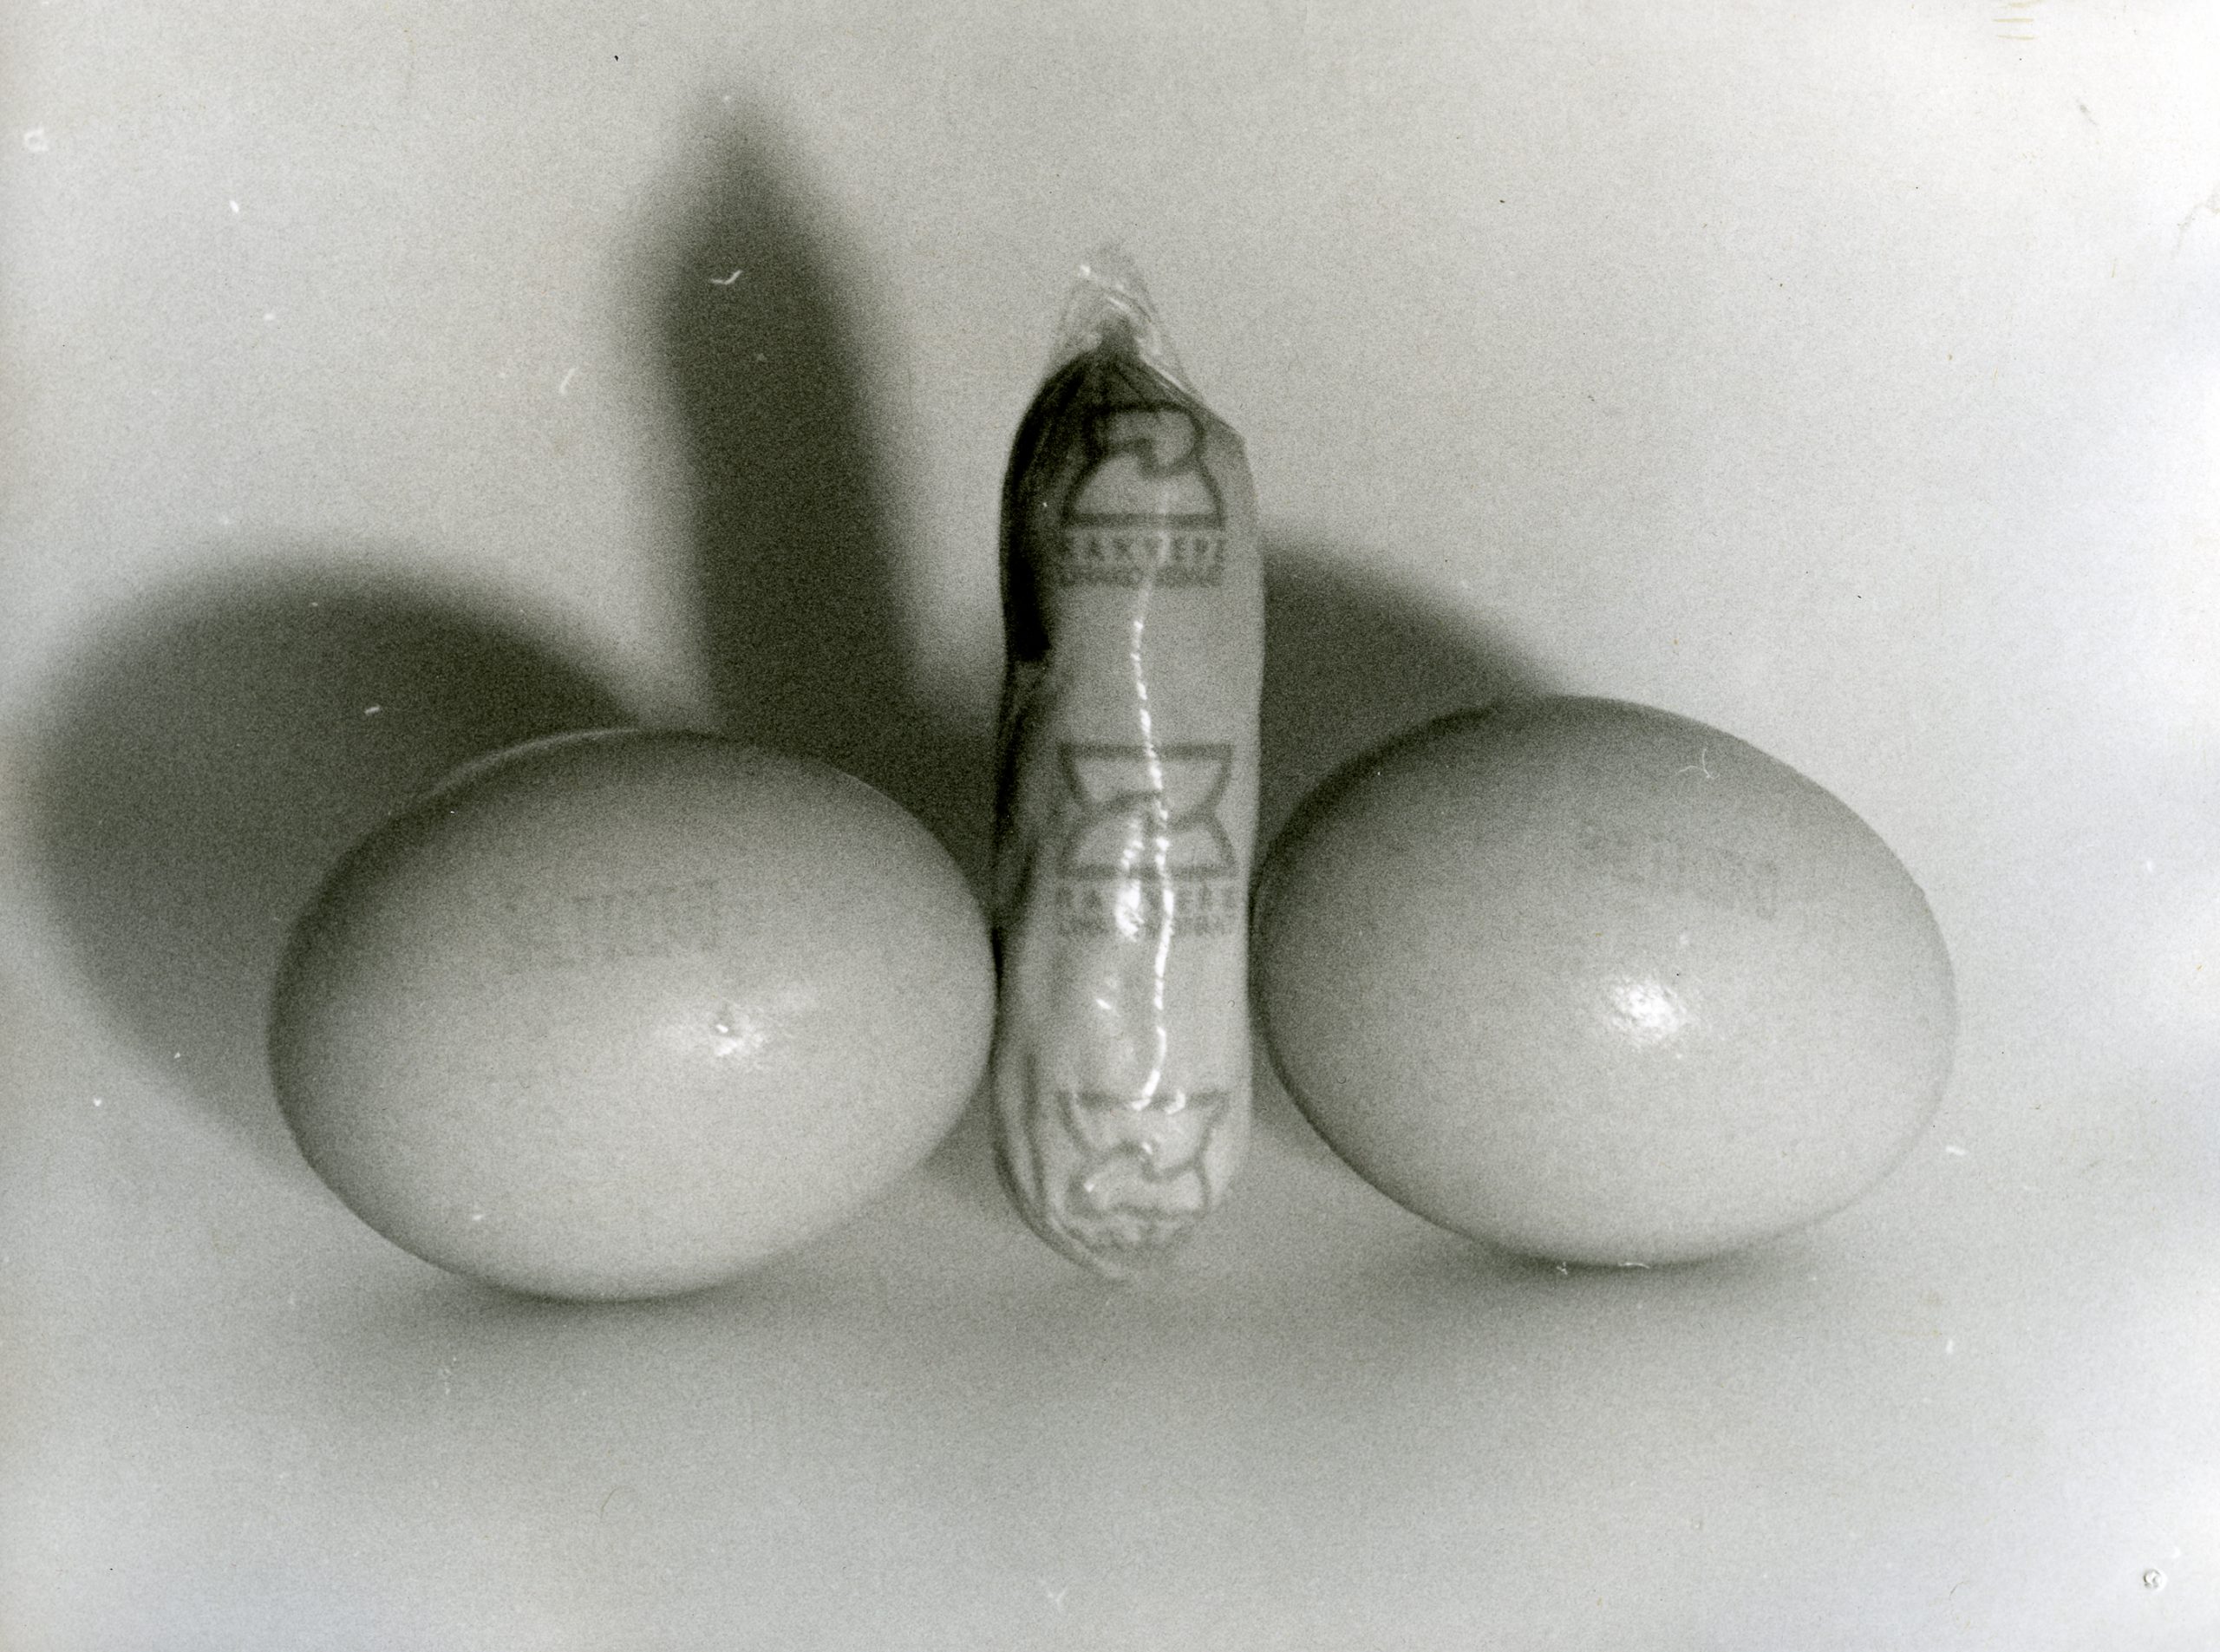 12_Erotic composition with two eggs and sausage, b&w photograph, 1997